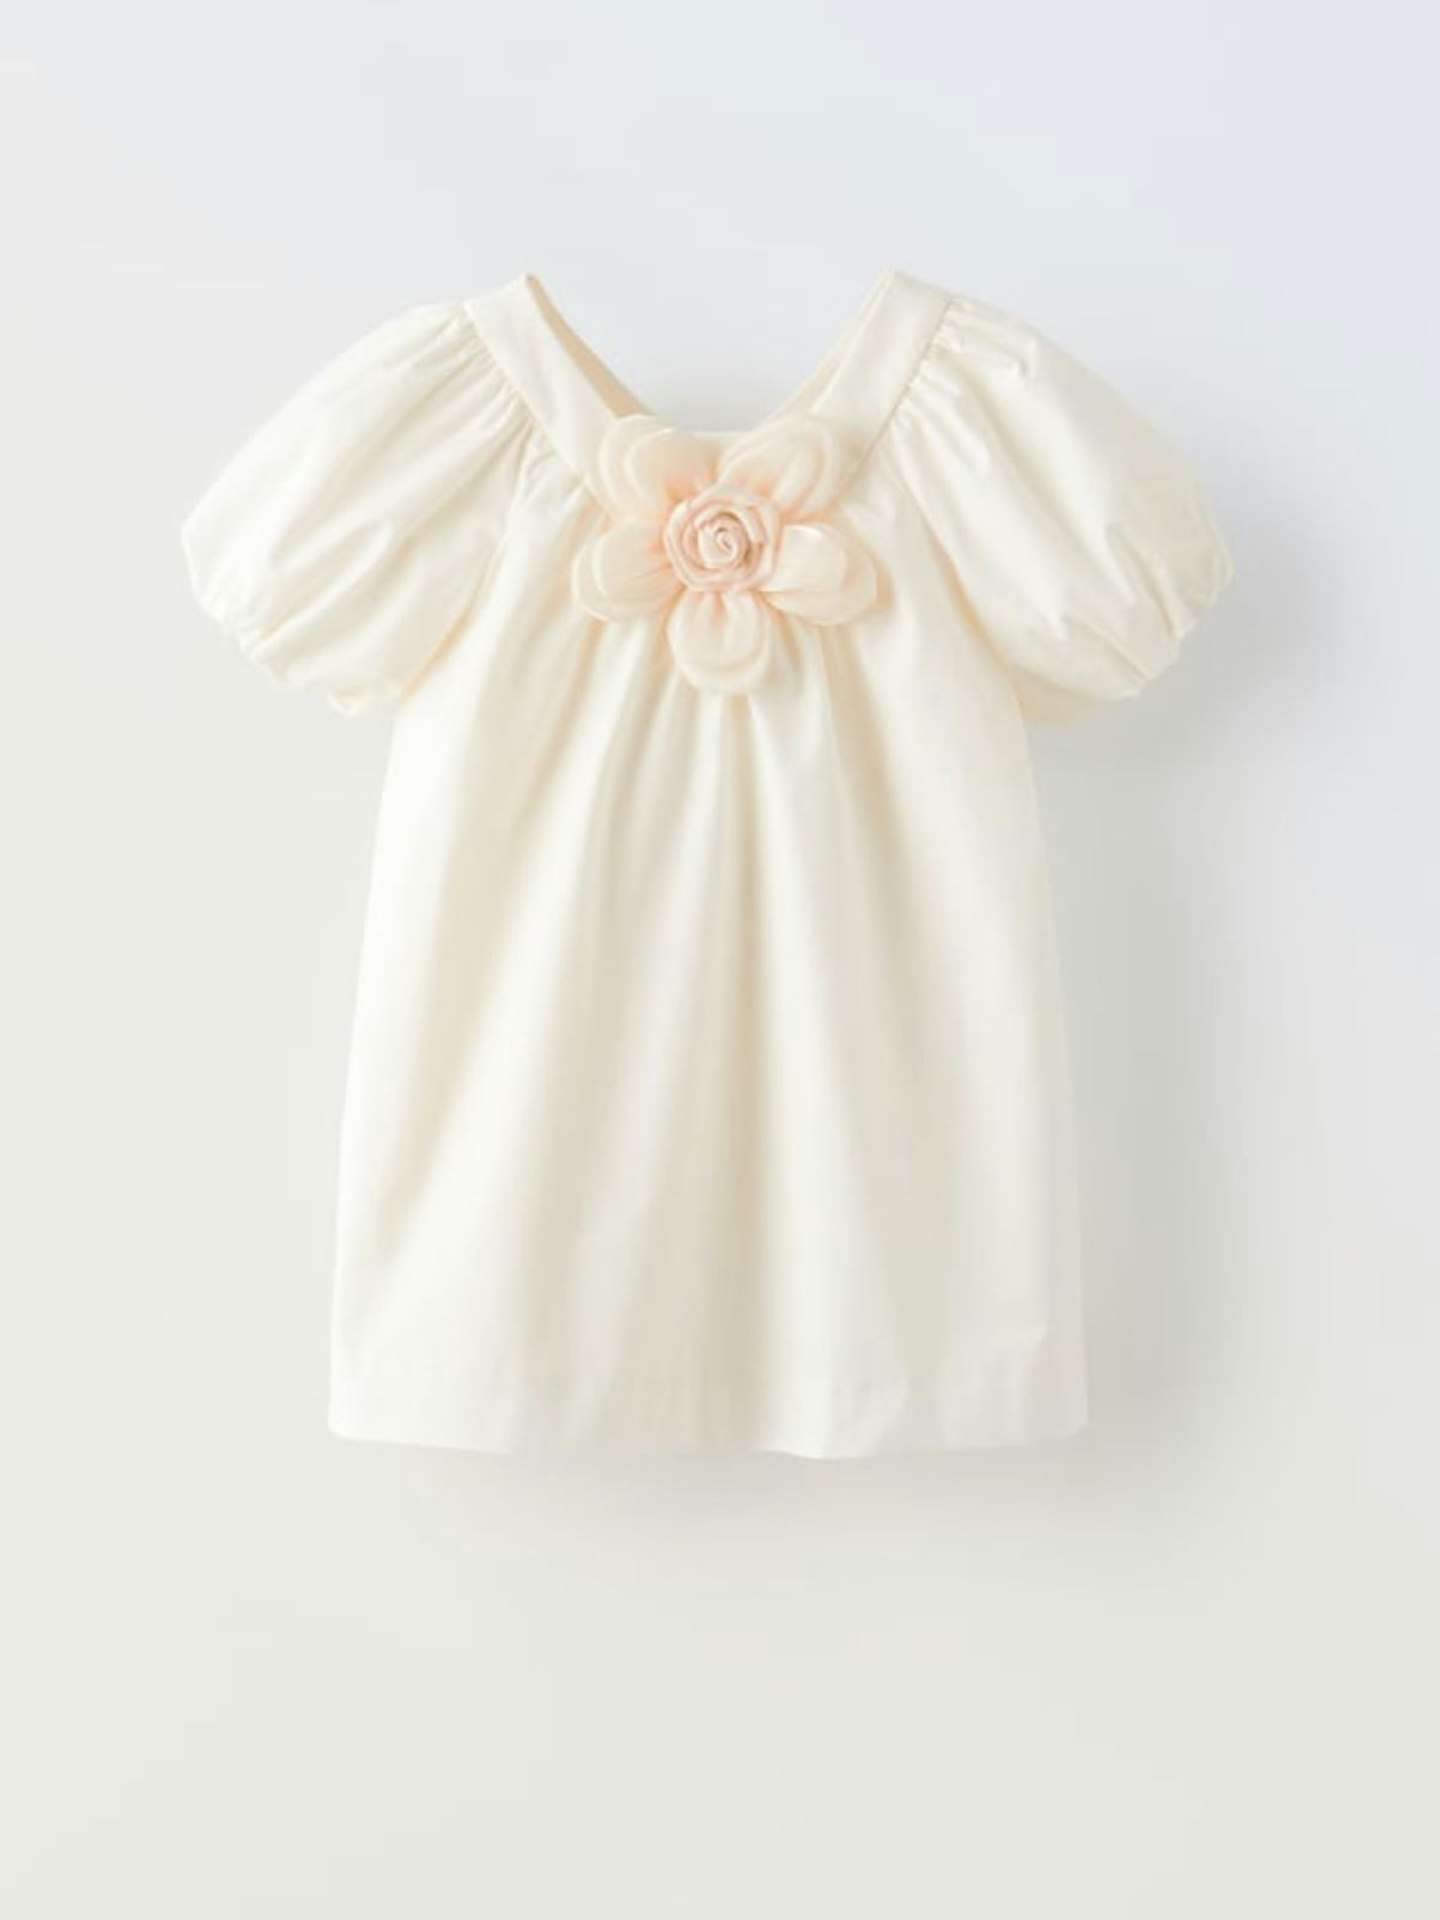 The Best Flower Girl Dresses For The Tiniest Members Of Your Bridal ...